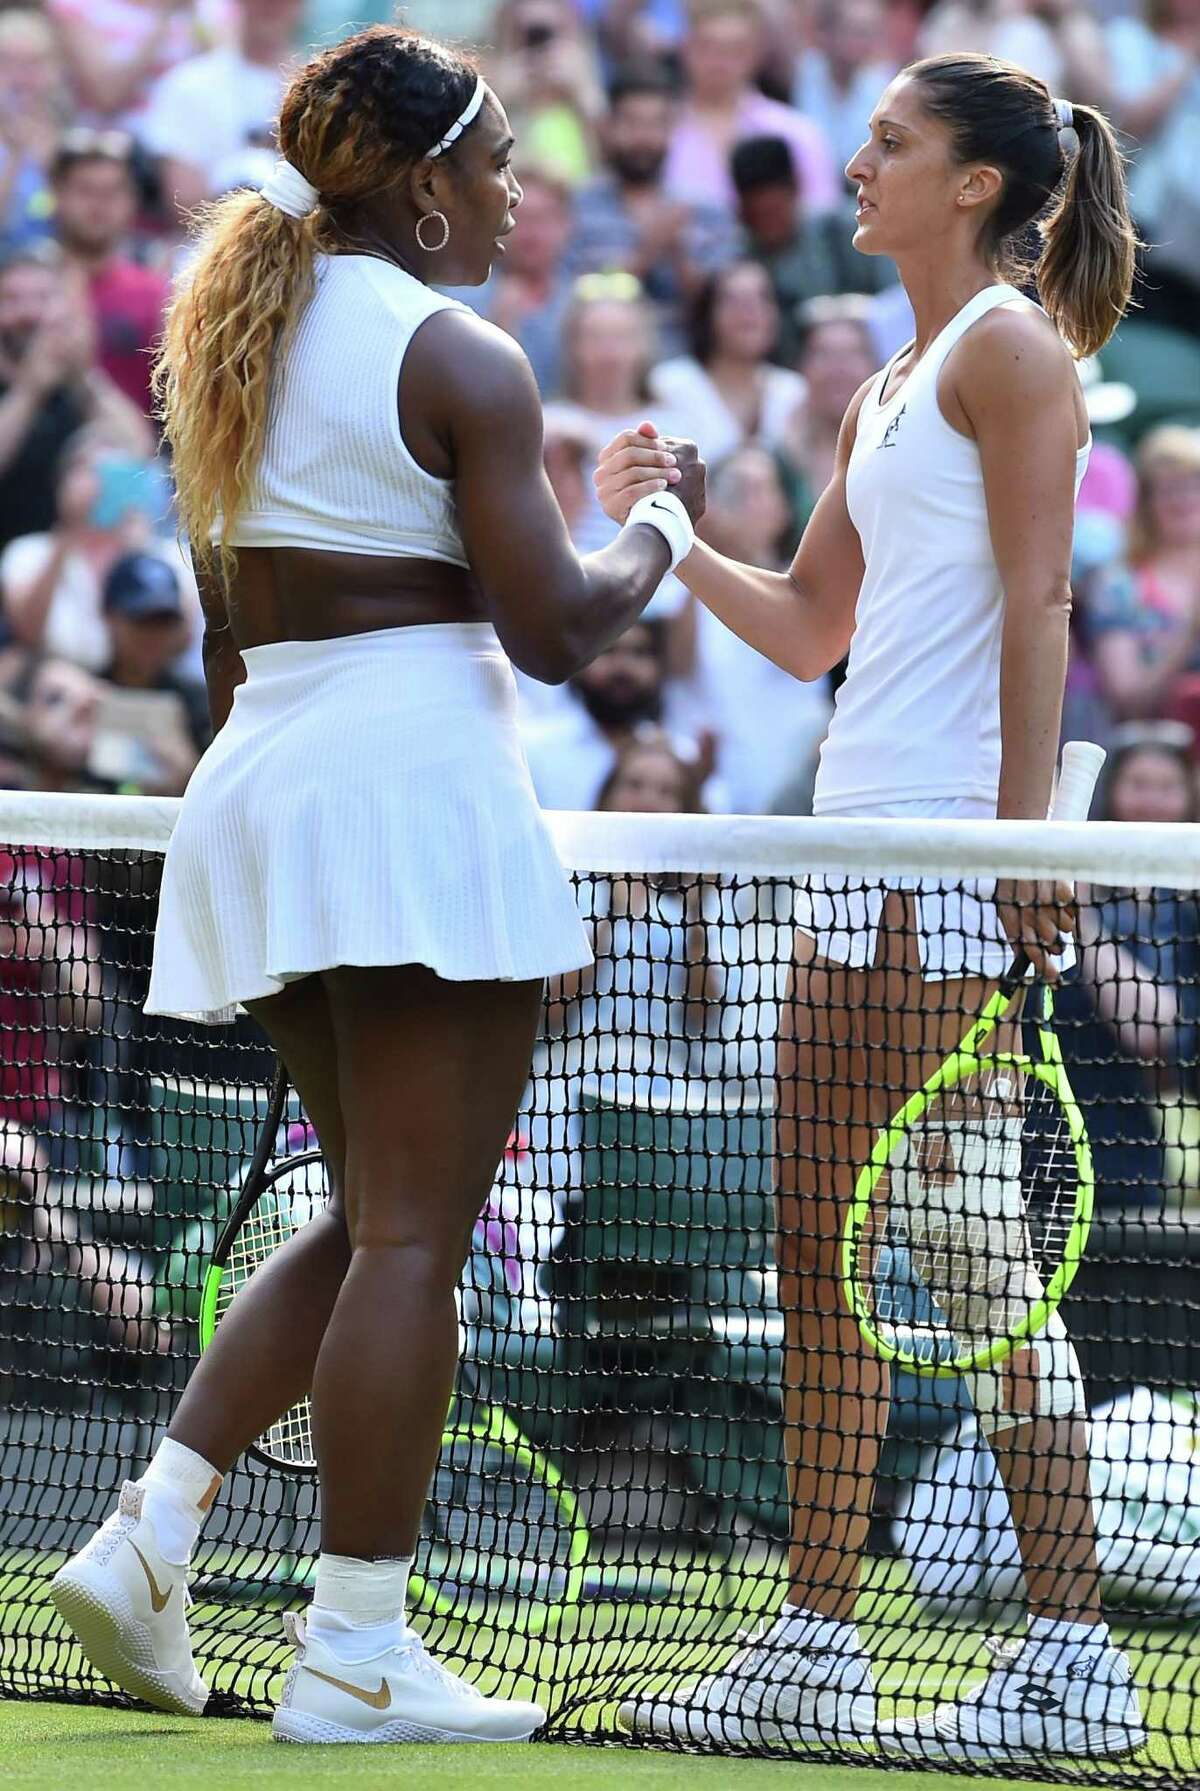 US player Serena Williams is congratulated by Italia's Giulia Gatto-Monticone after beating her during their women's singles first round match on the second day of the 2019 Wimbledon Championships at The All England Lawn Tennis Club in Wimbledon, southwest London, on July 2, 2019. (Photo by Glyn KIRK / AFP) / RESTRICTED TO EDITORIAL USEGLYN KIRK/AFP/Getty Images